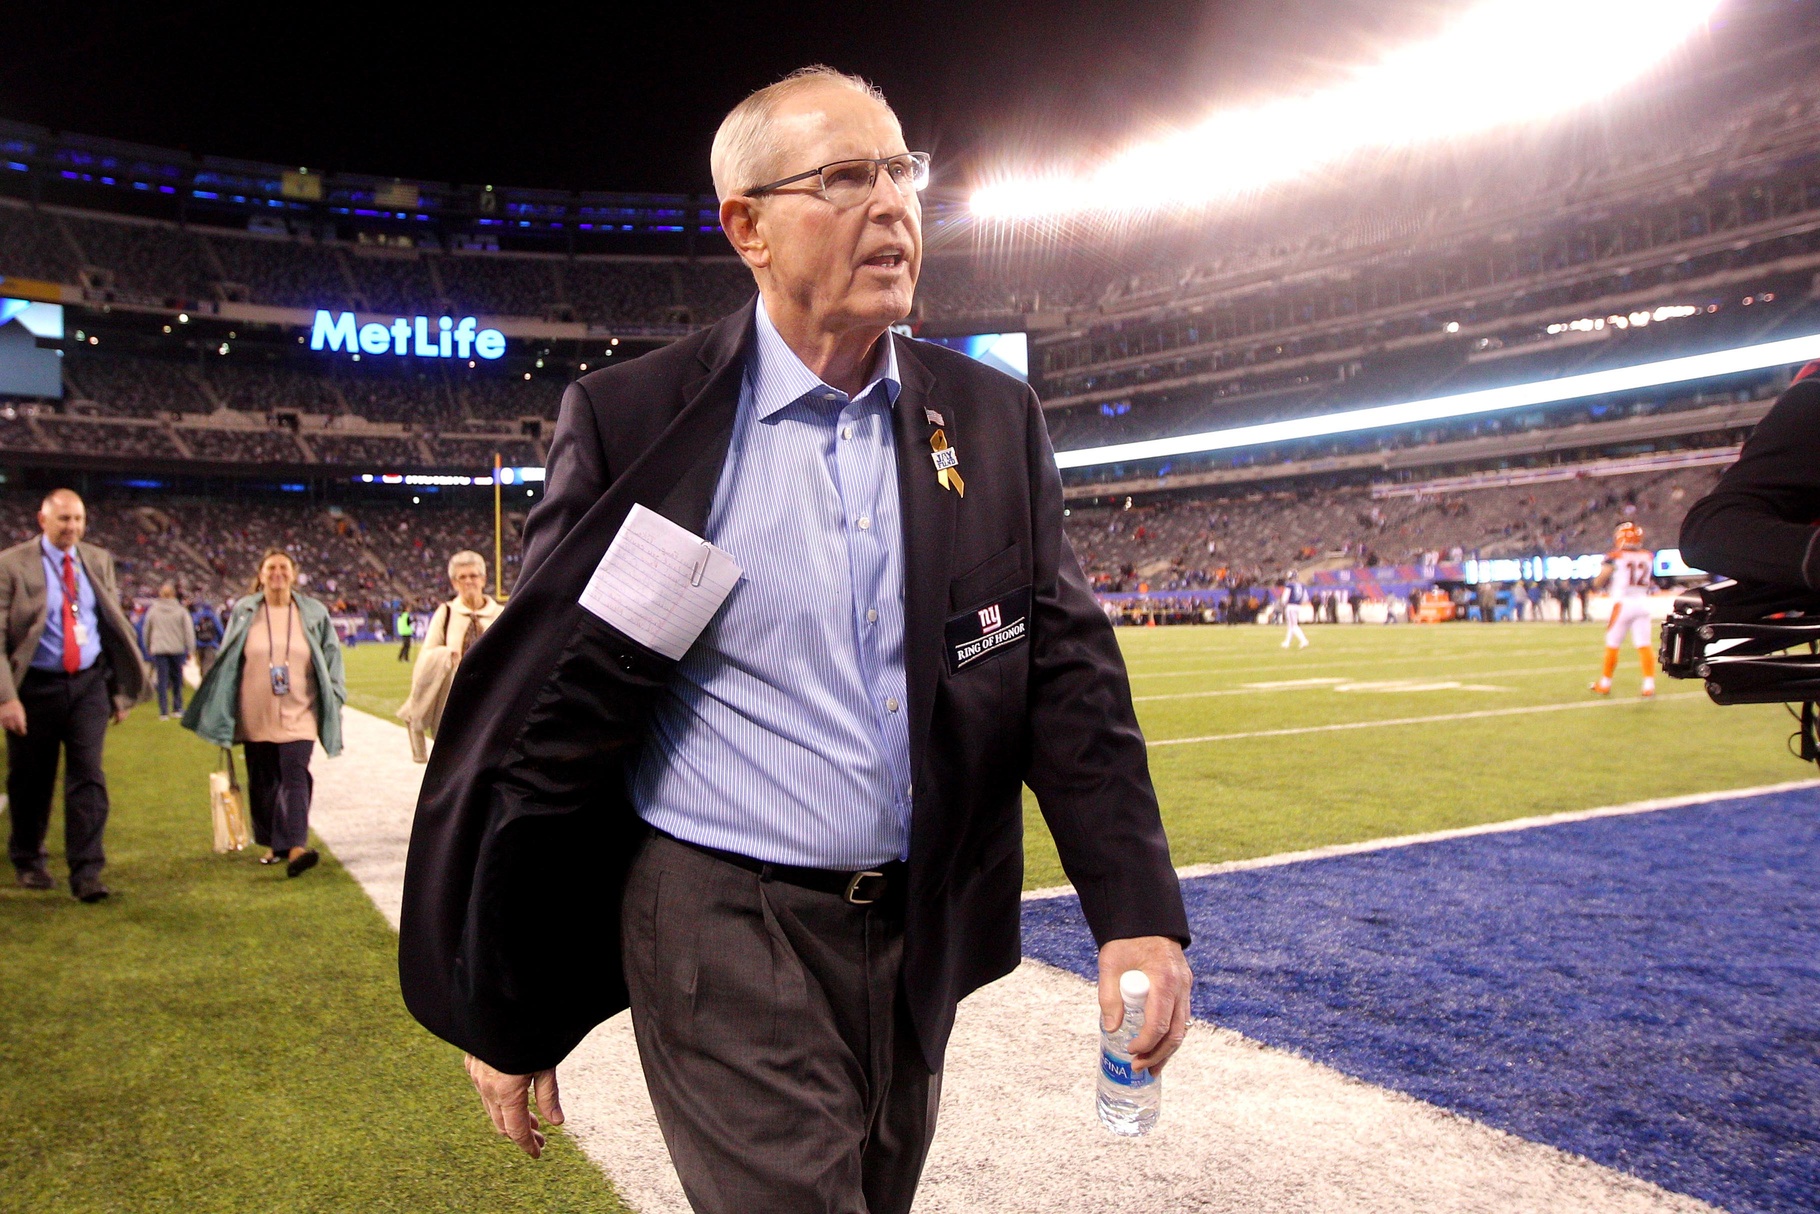 Nov 14, 2016; East Rutherford, NJ, USA; New York Giants former head coach Tom Coughlin walks off the field after being interviewed before a game between the New York Giants and the Cincinnati Bengals at MetLife Stadium. The Giants will induct Coughlin into their Ring of Honor during a halftime ceremony. Mandatory Credit: Brad Penner-USA TODAY Sports